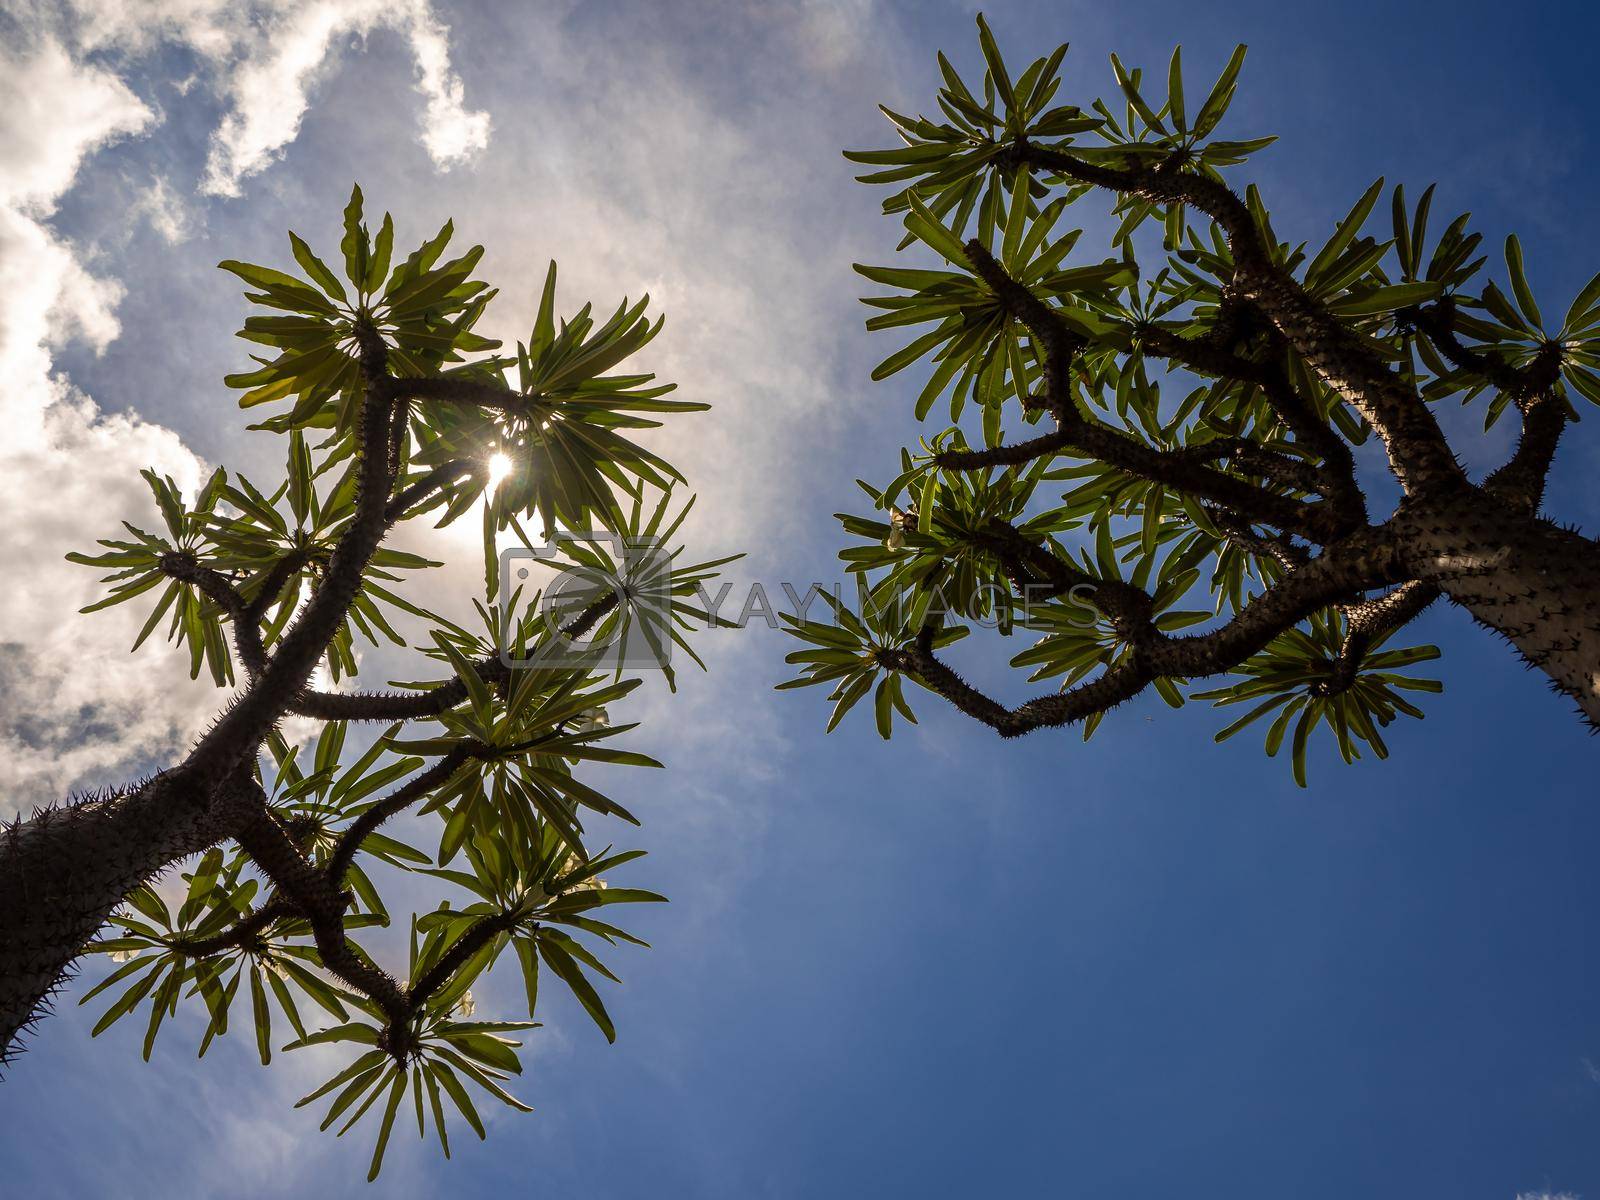 Royalty free image of Madagascar palm the Spiky desert plant in the hard sunlight of daytime by Satakorn